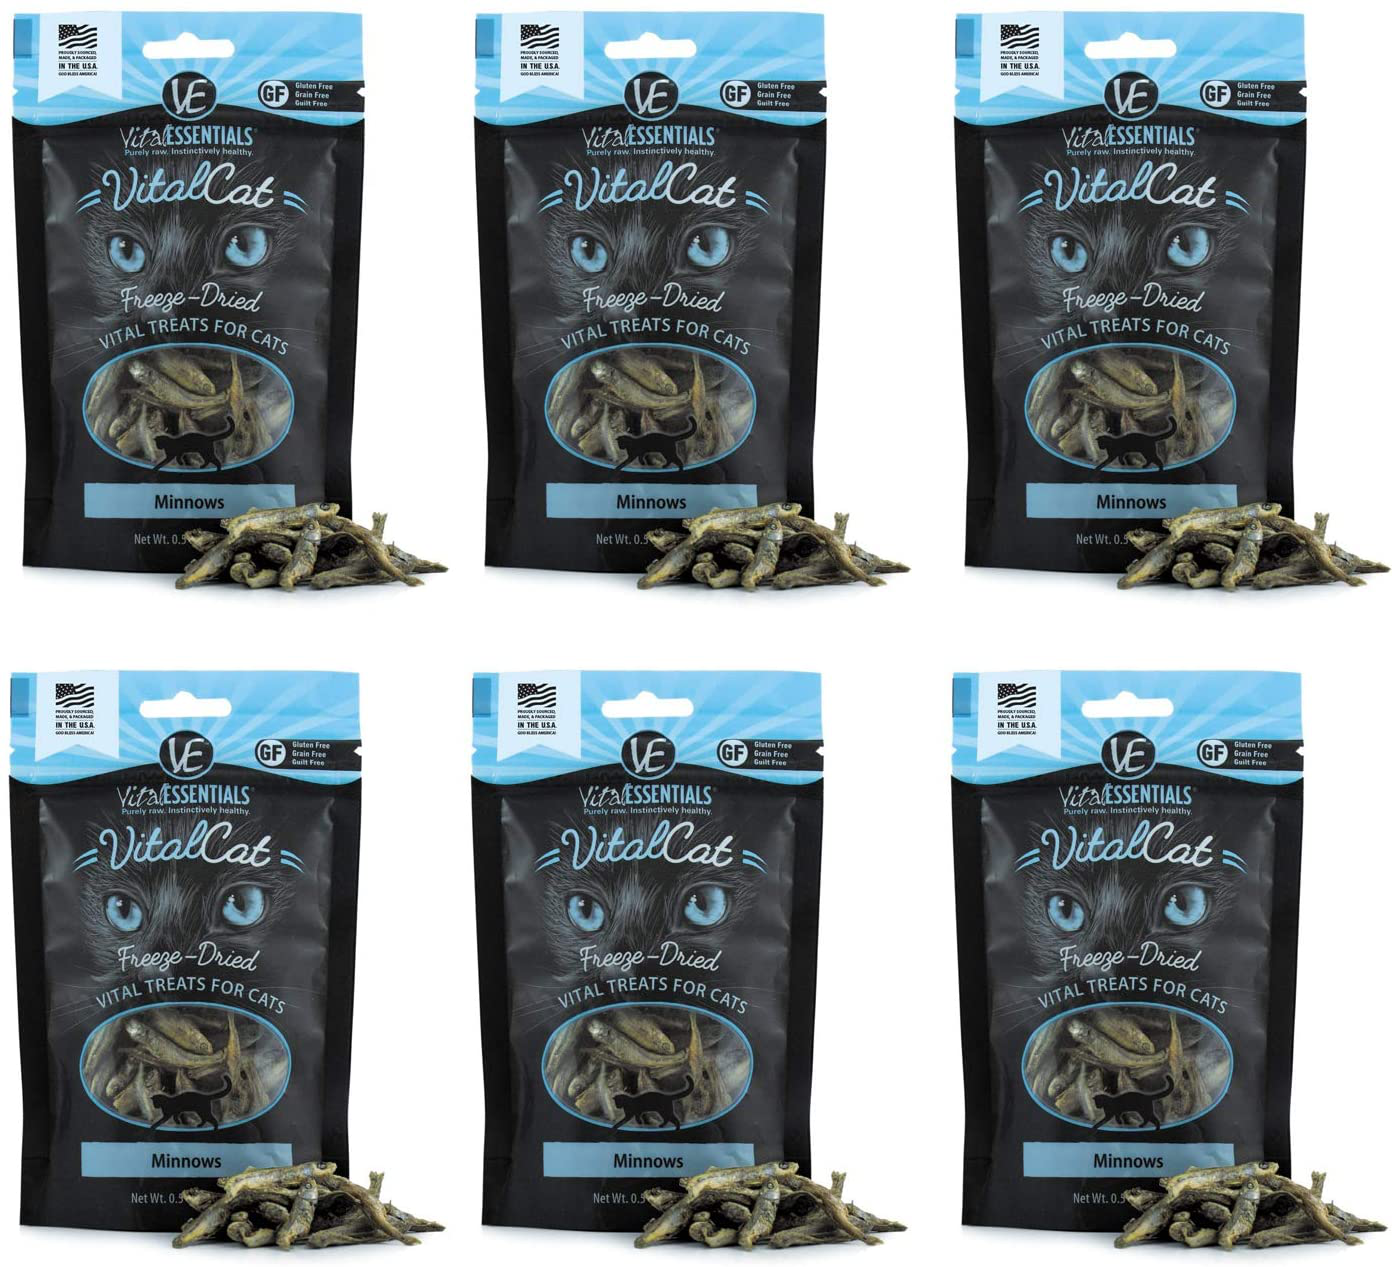 Vital Cat 6 Pack Freeze-Dried Minnows Grain Free Limited Ingredient Cat Treats - 0.5 Ounce Each Bag